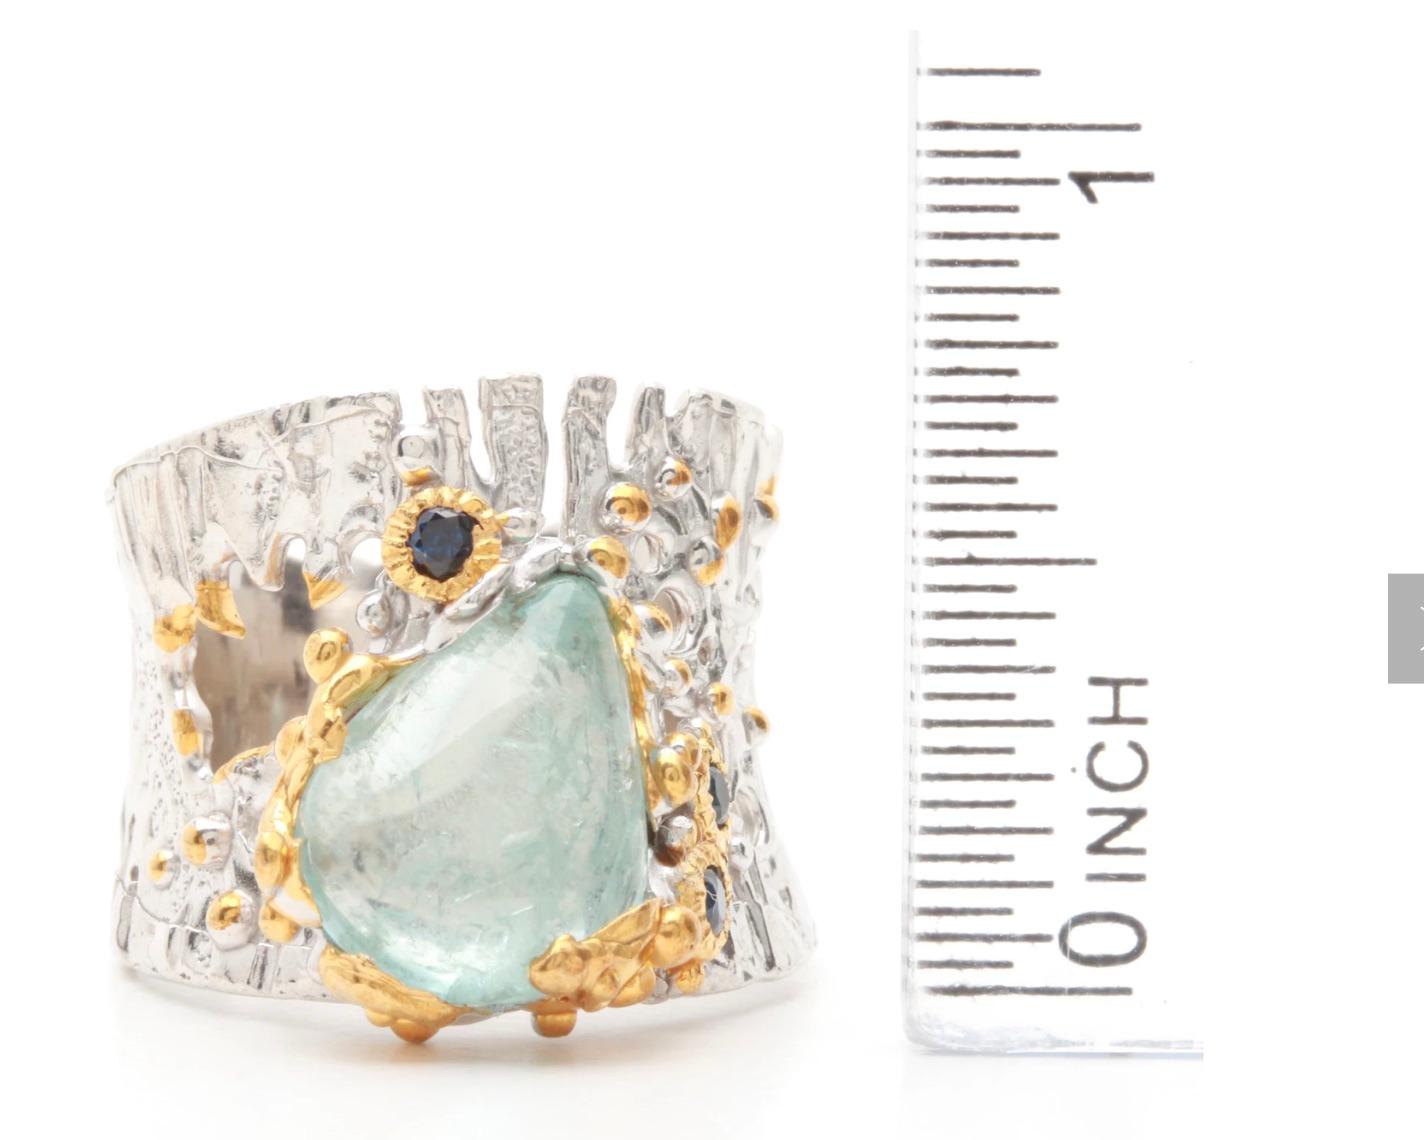 A Stunning artist designed Brutalist Sterling Silver and Vermeil, Pear shaped Aquamarine Cabochon Ring. with 3 round faceted sapphires and gold plate beads and trim.. 
The gemstones showcase the Unique Organic Openwork Live Edge sterling silver